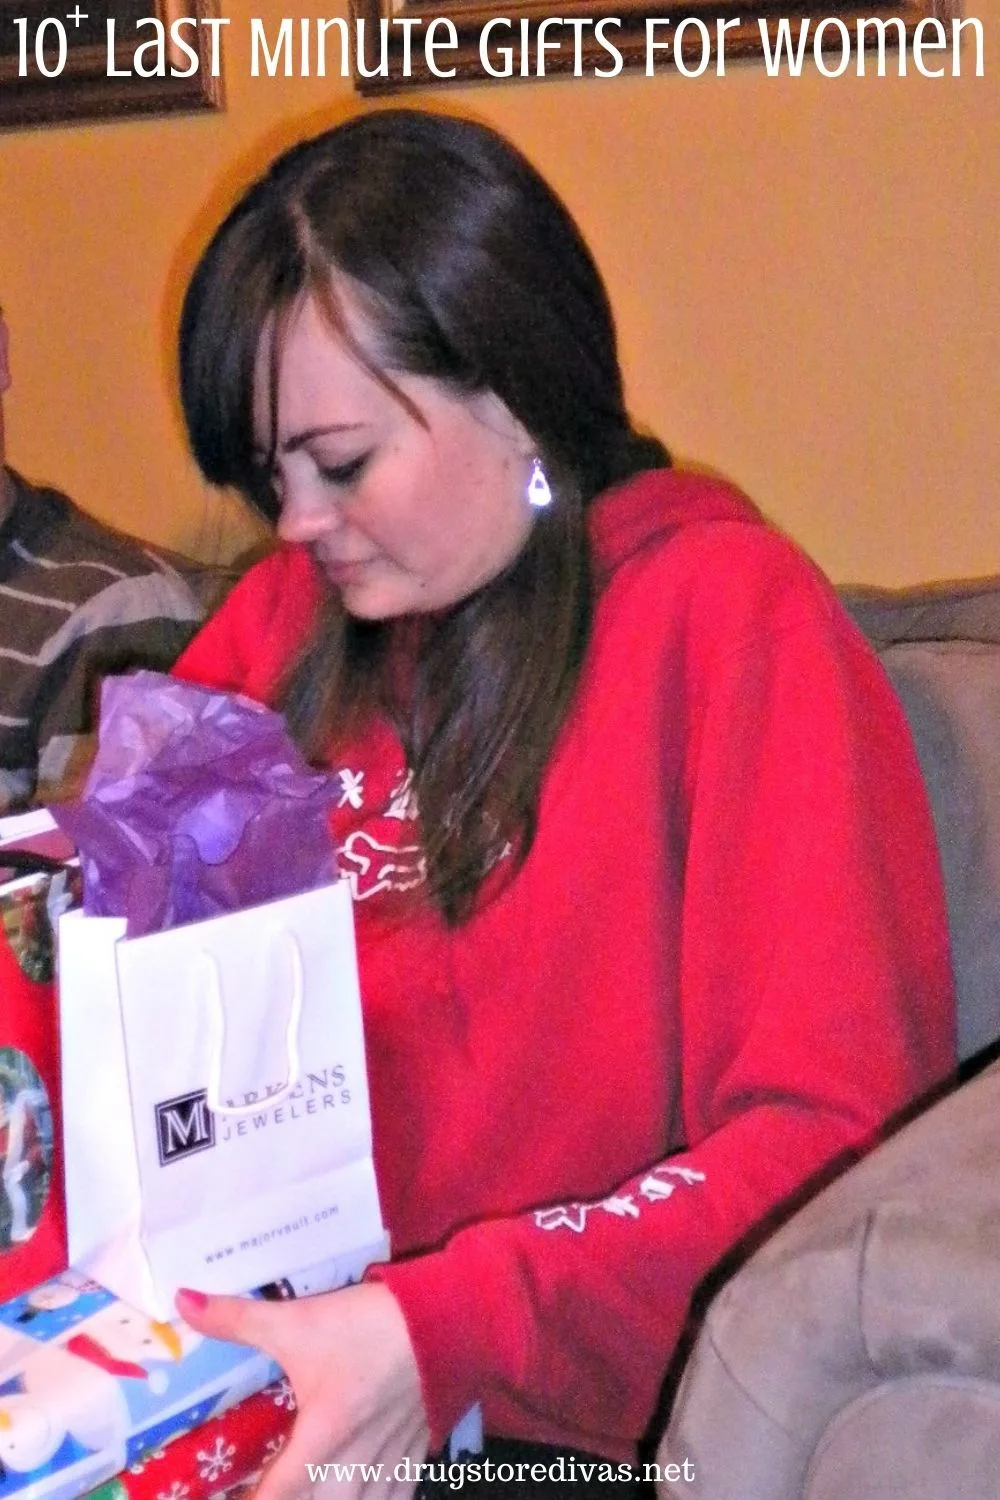 Woman opening a present with the words 